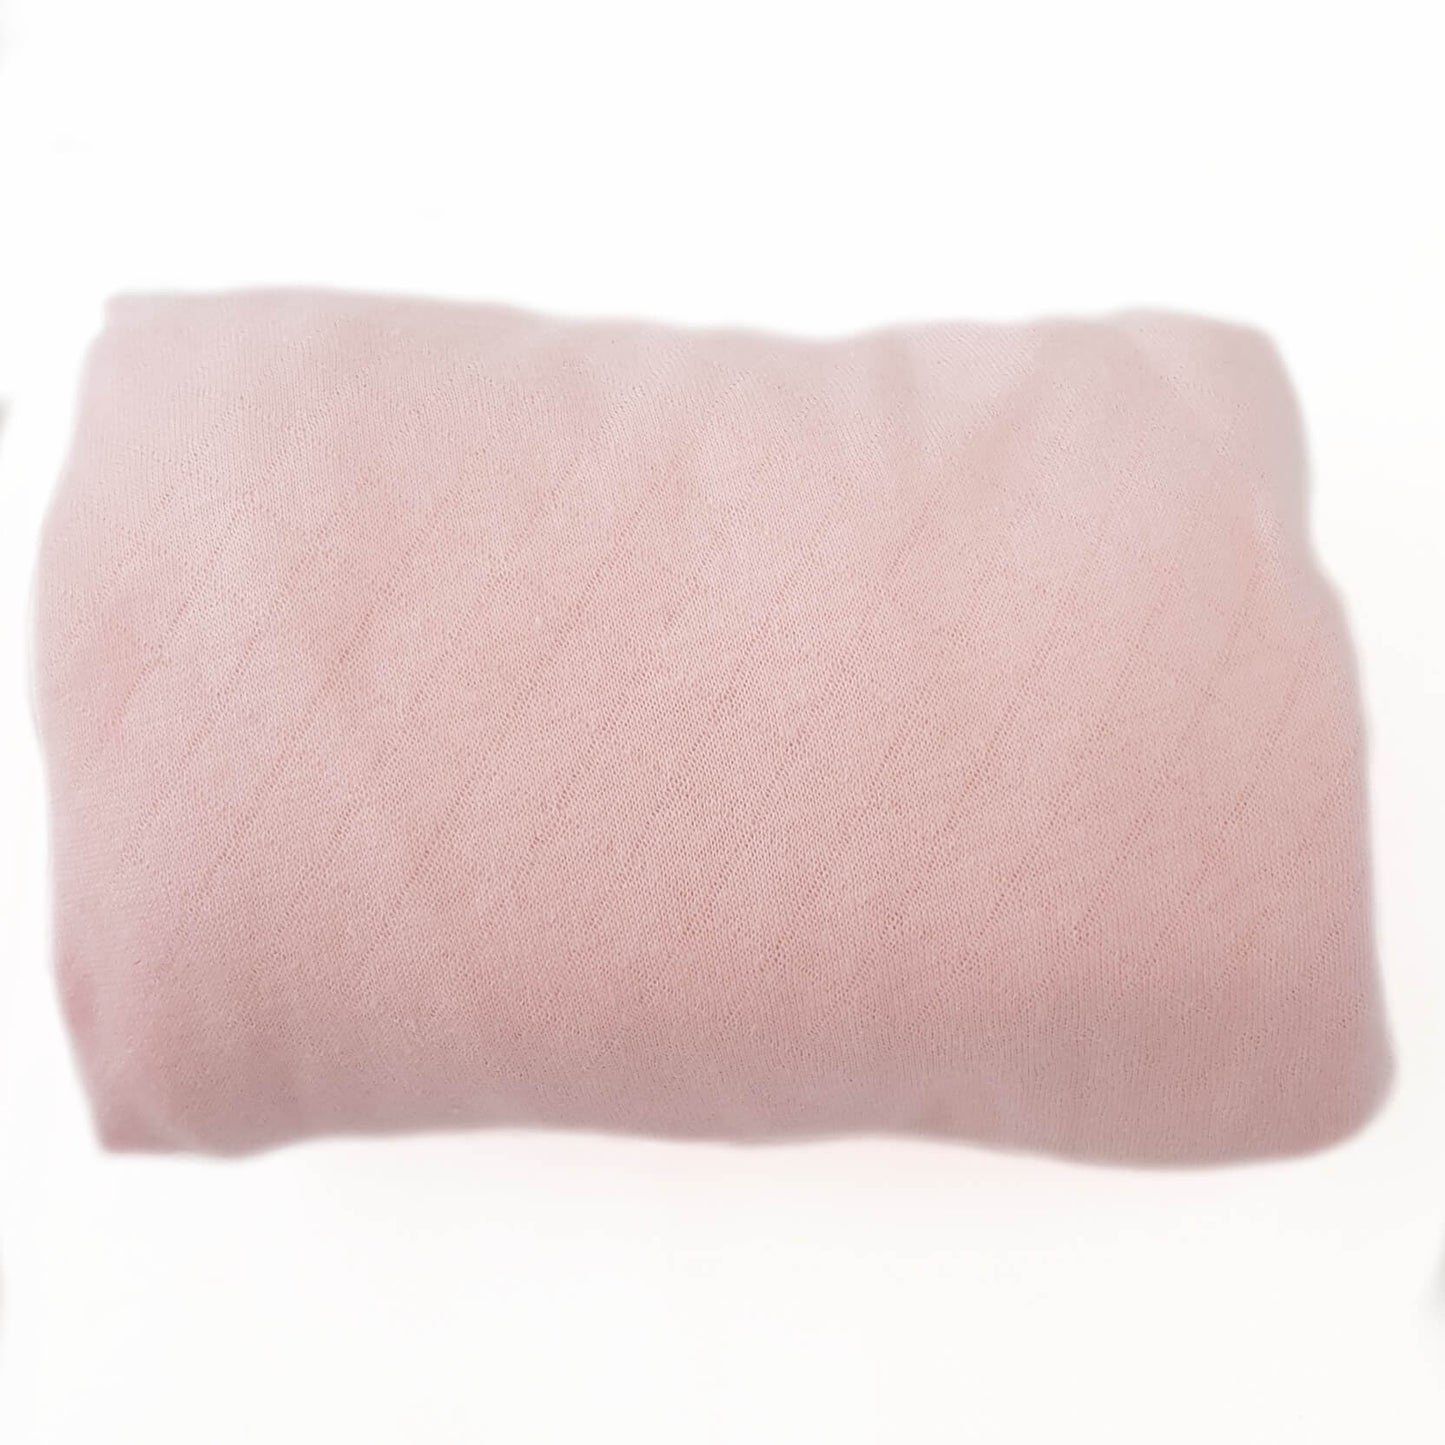 pink sheet for carry cot moses basket evcushy  Ireland